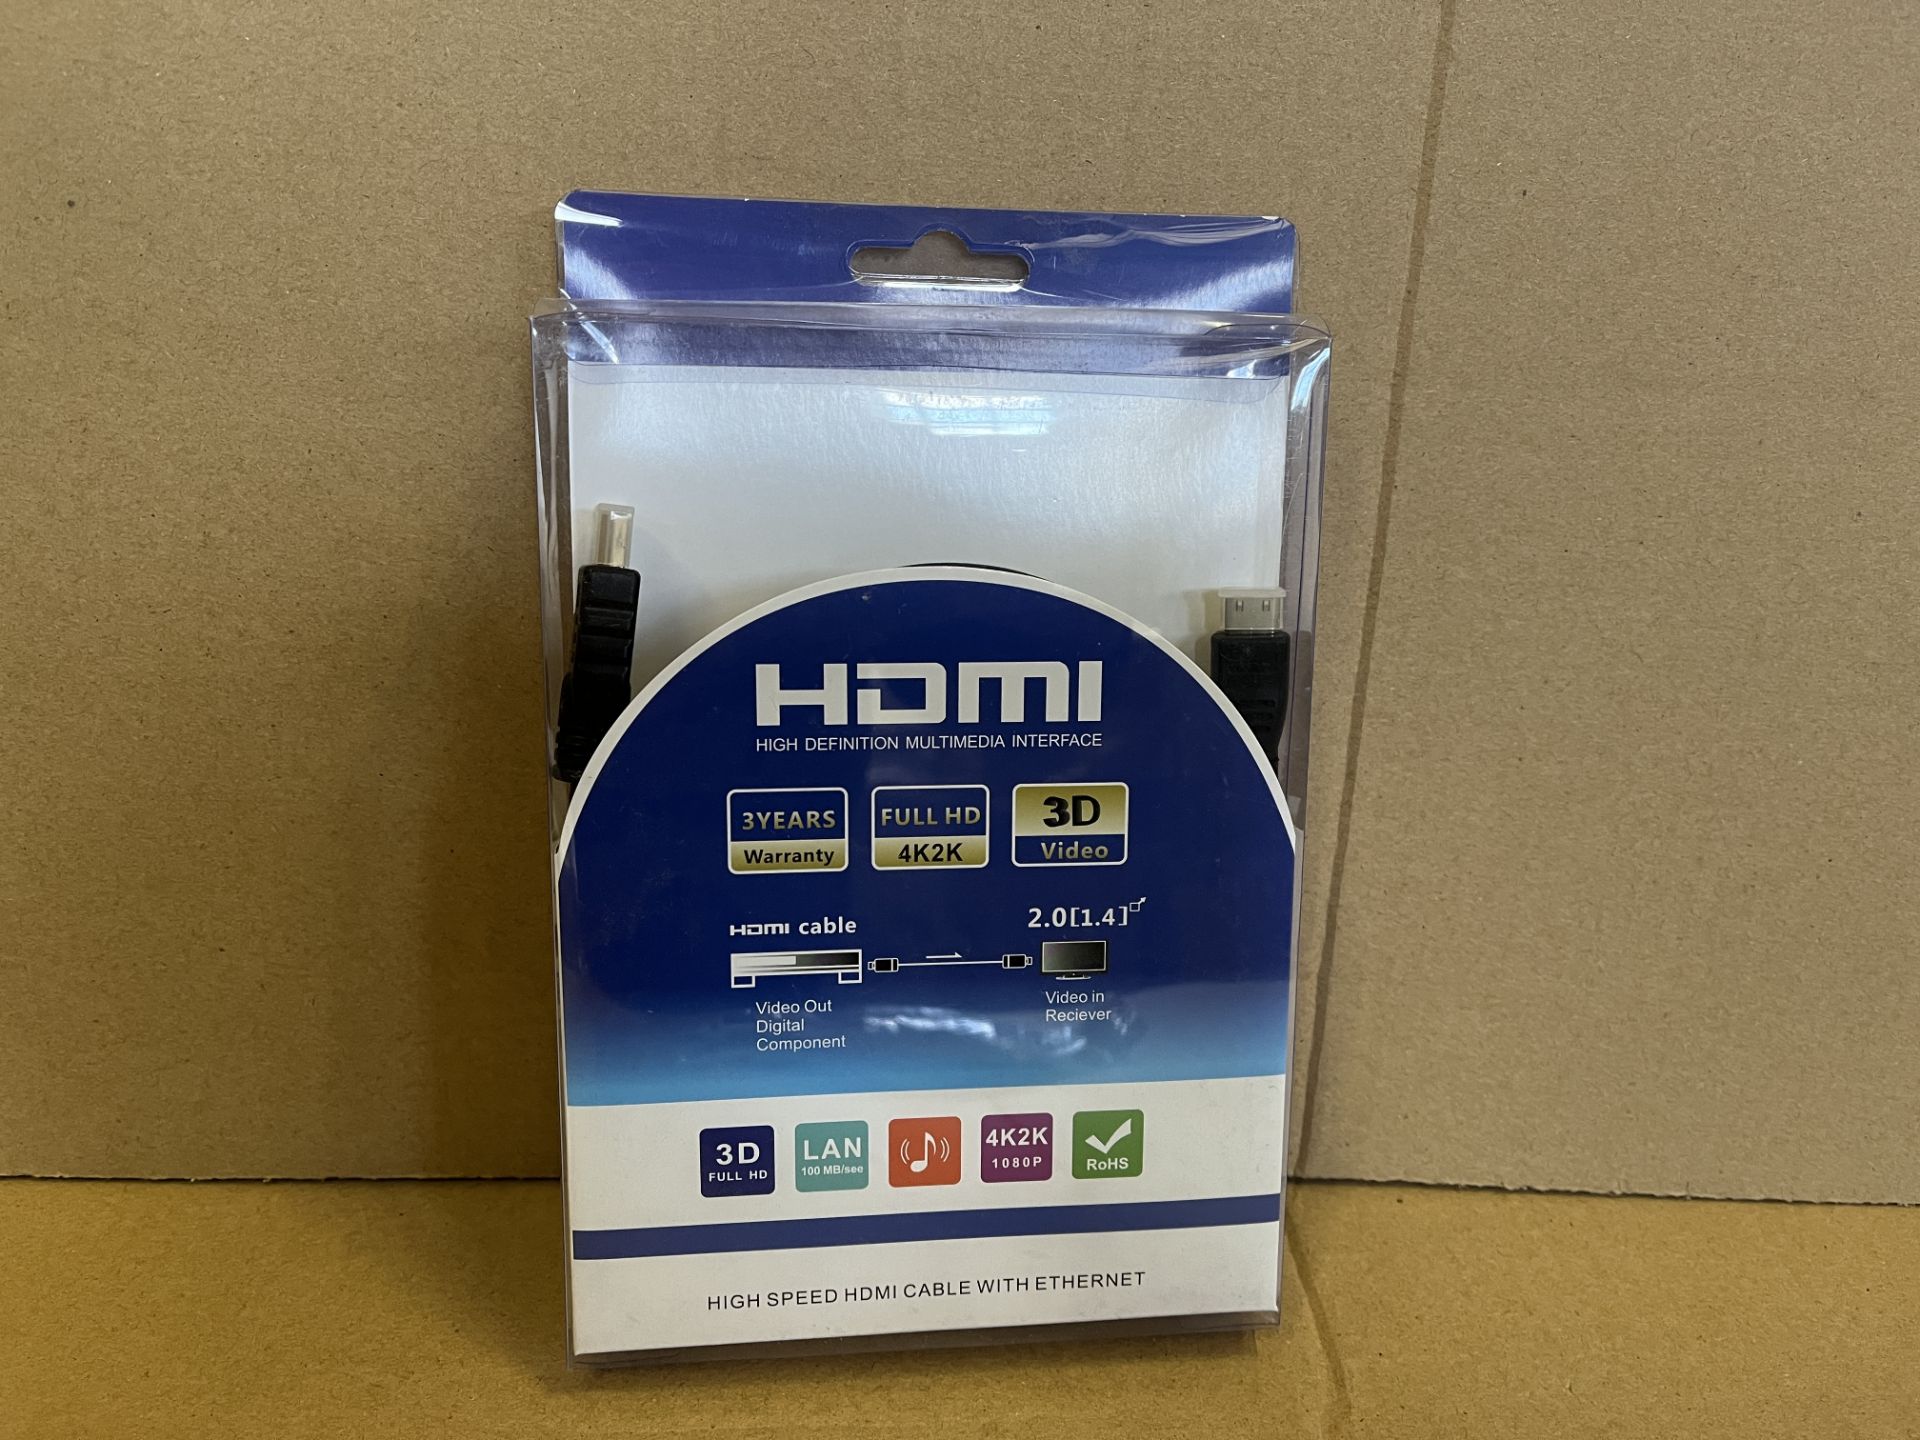 26 X BRAND NEW HDMI 3D FULL HD CABLES S1-30